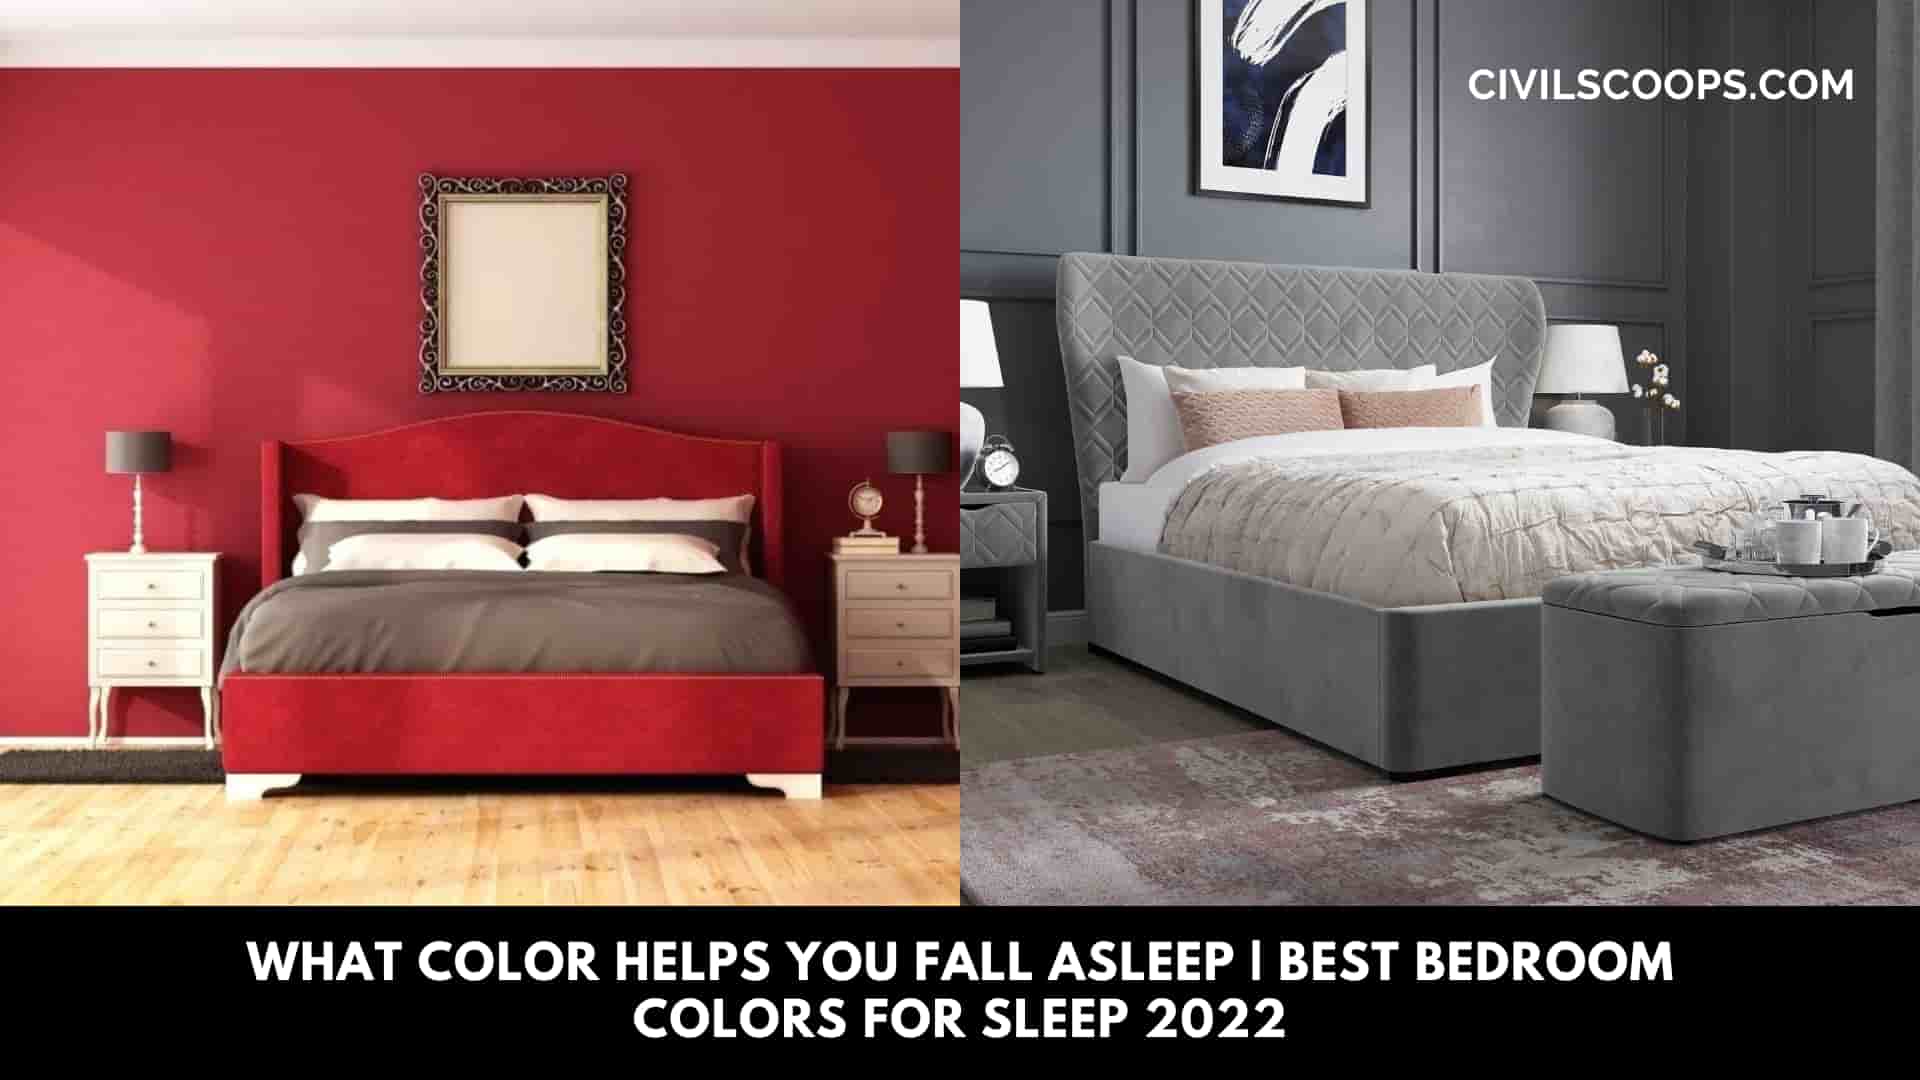 What Color Helps You Fall Asleep | Best Bedroom Colors for Sleep 2022